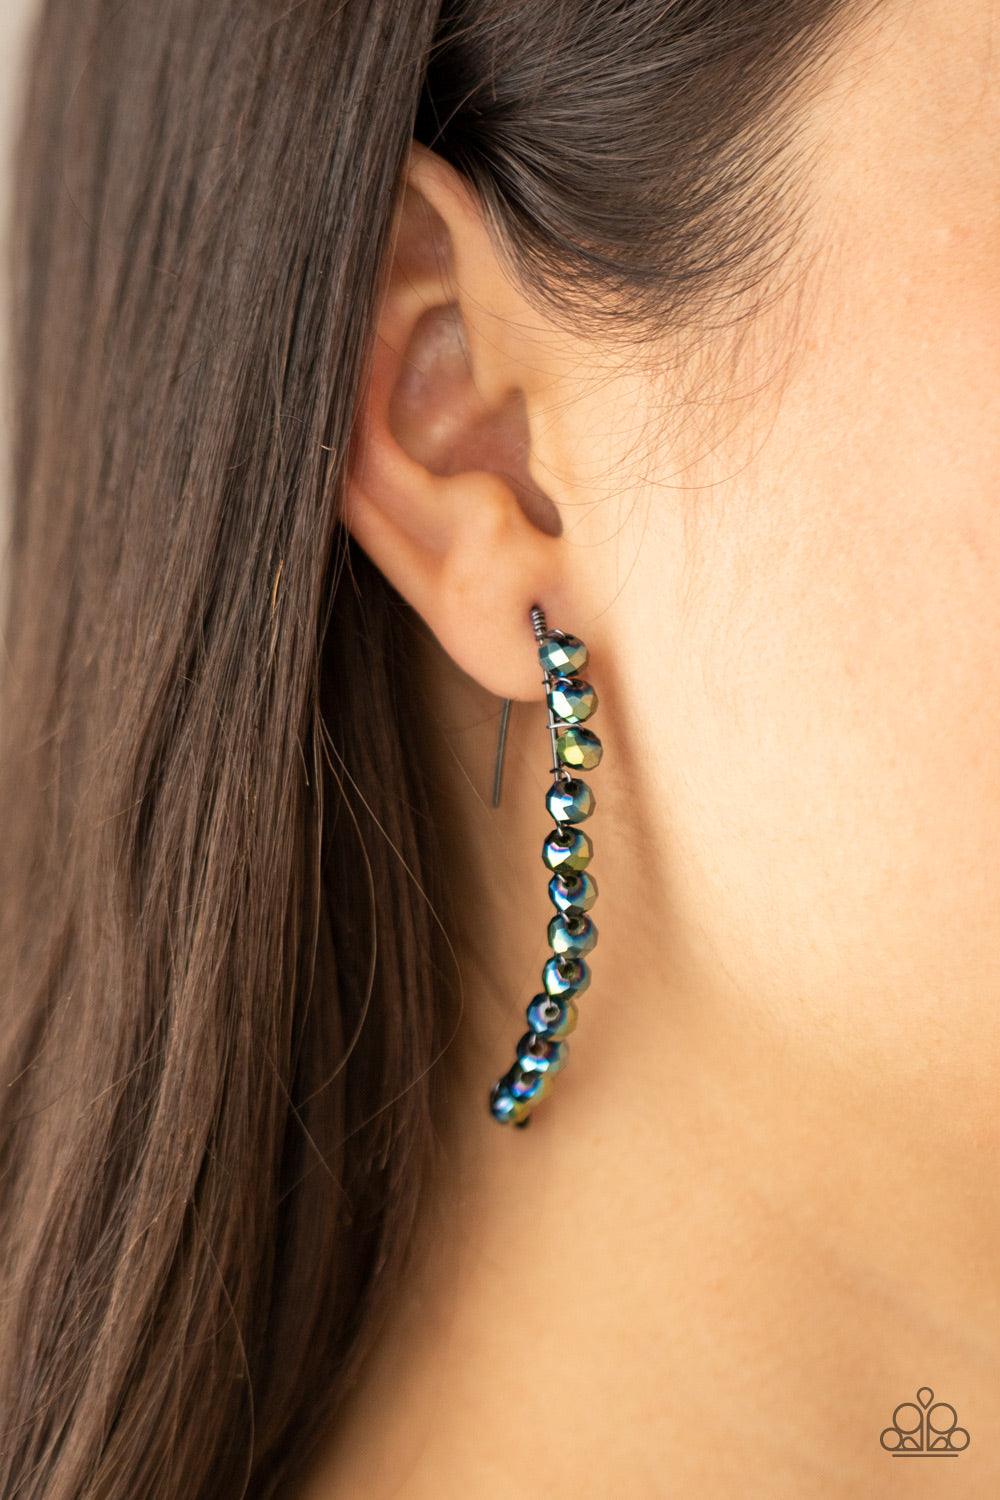 Paparazzi Accessories GLOW Hanging Fruit - Multi A glittery collection of iridescent flecked metallic blue rhinestones are fitted in place along a curved gunmetal wire, creating a glamorous hanging post. Earring attaches to a standard hanging post fitting